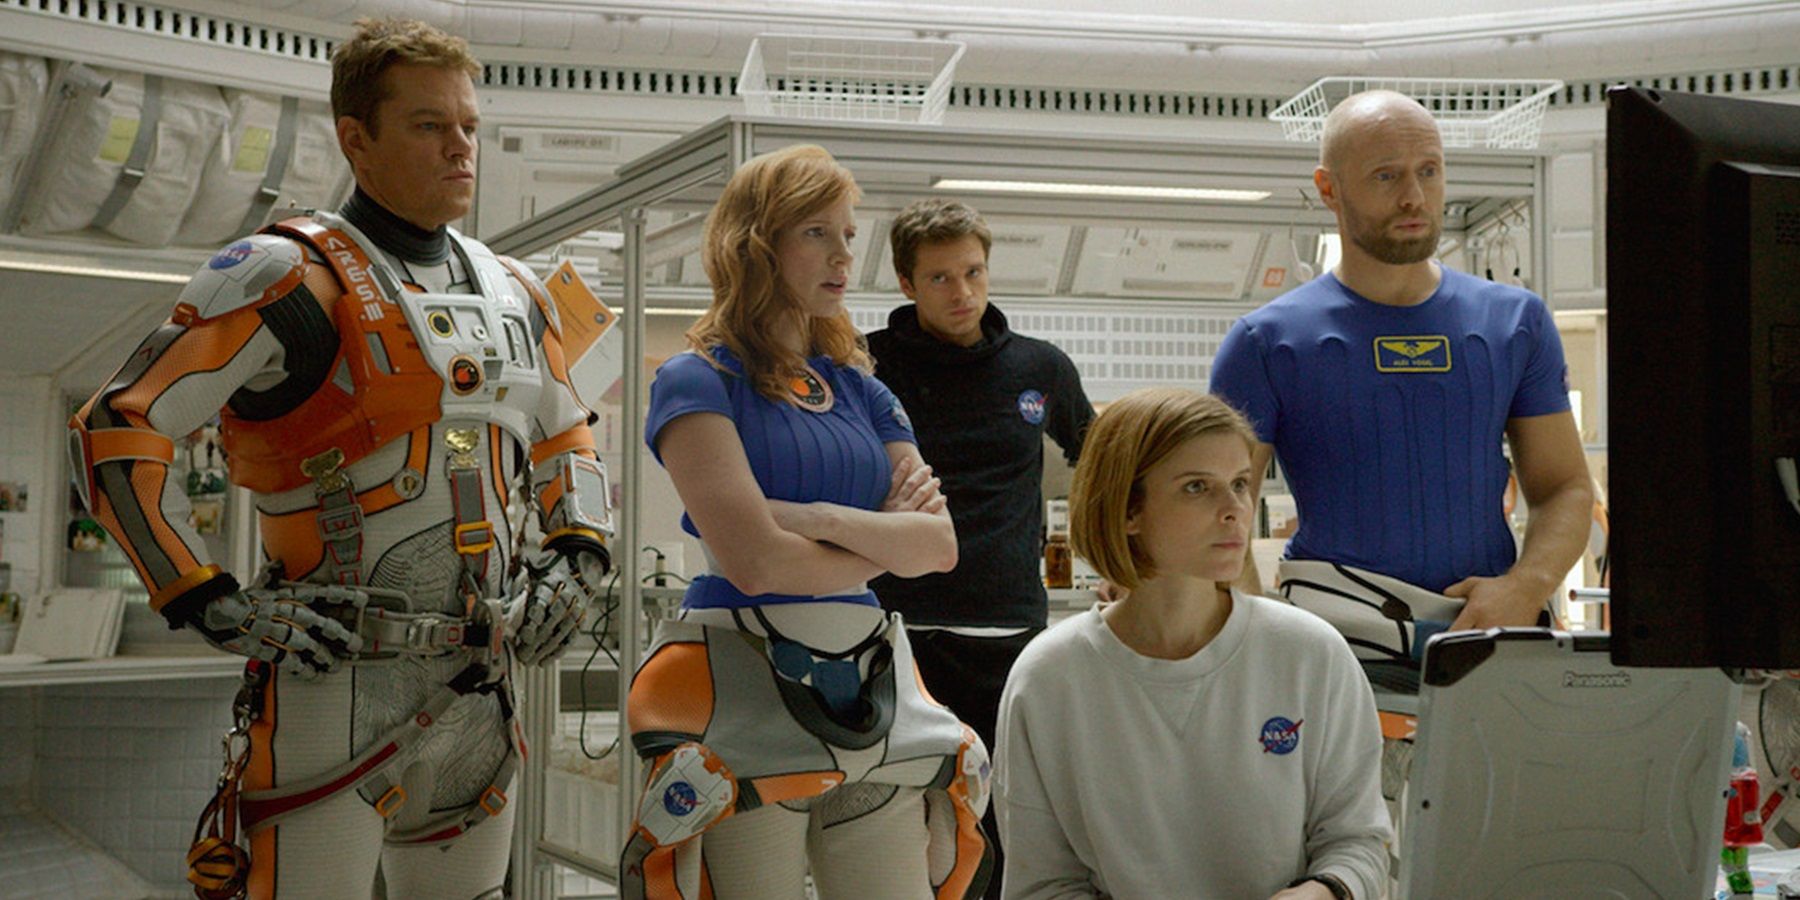 The Ares III crew in The Martian